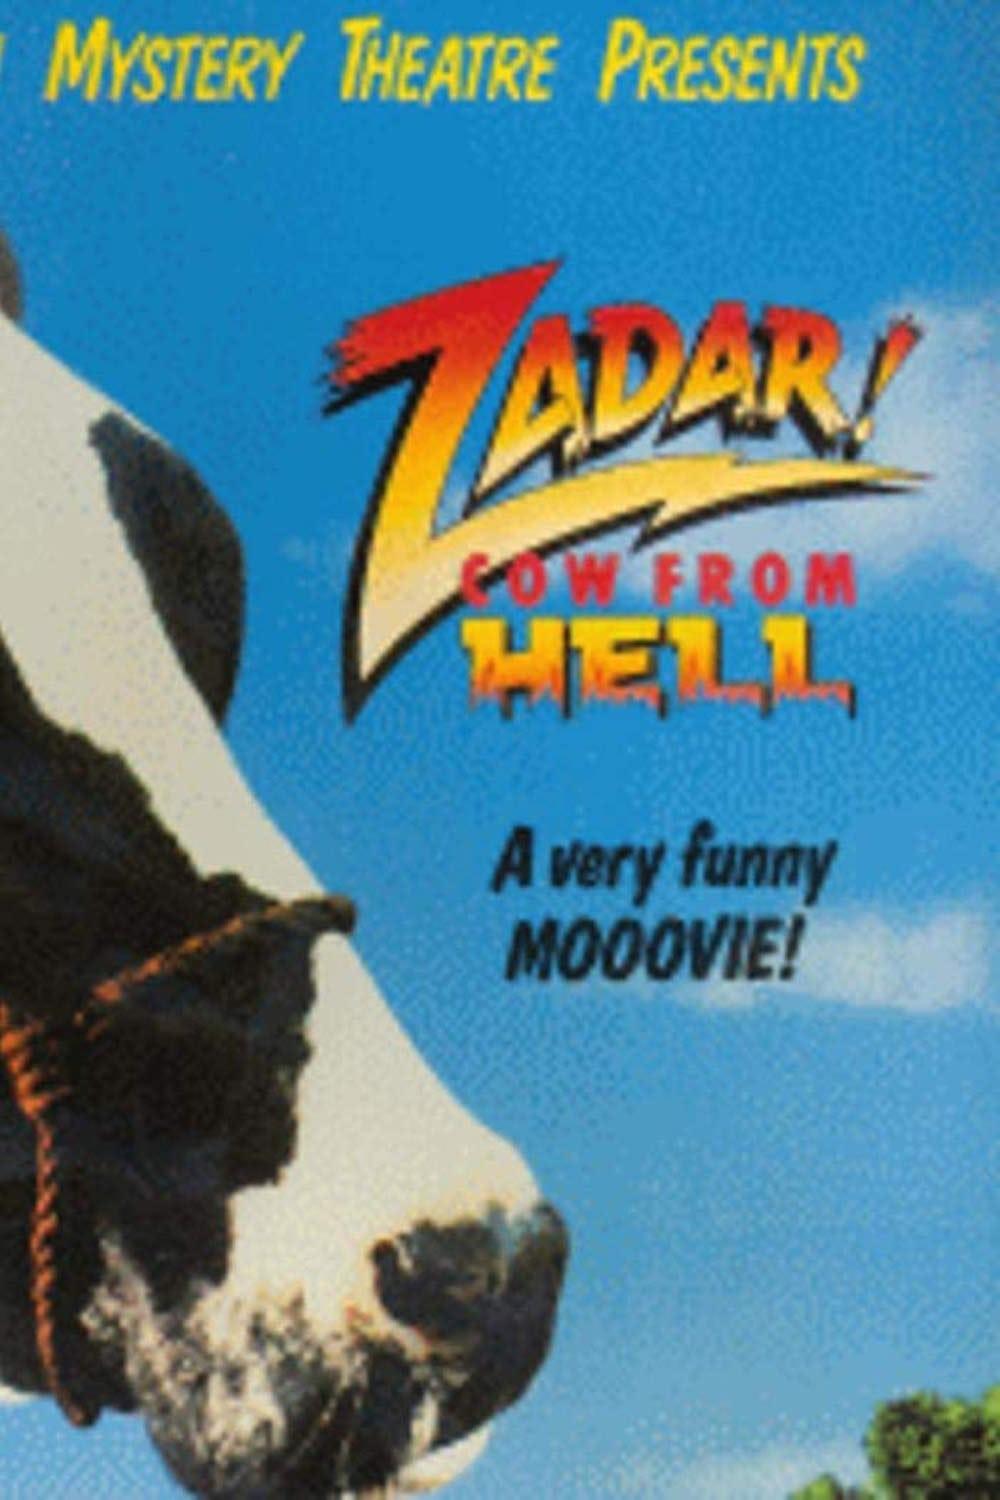 Zadar! Cow from Hell poster